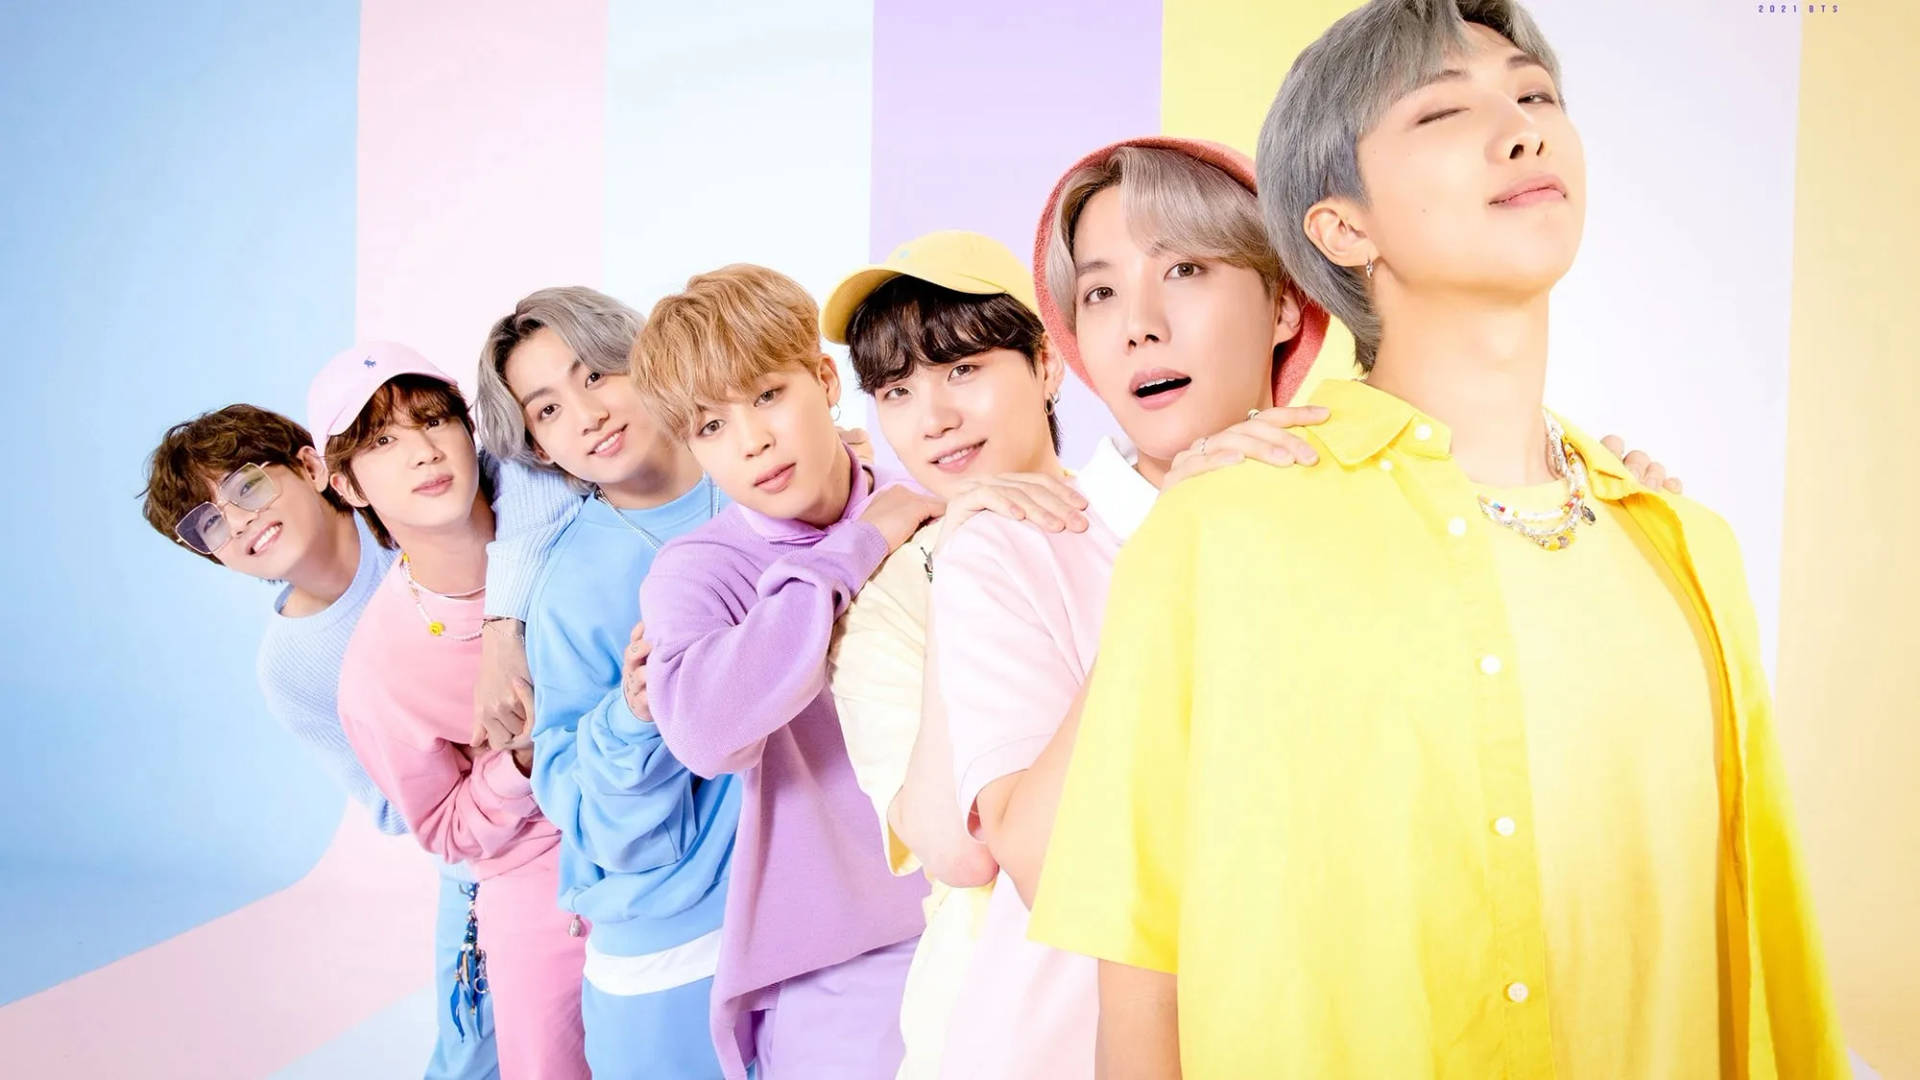 Cute Bts Group Lined Up In Pastel Colors